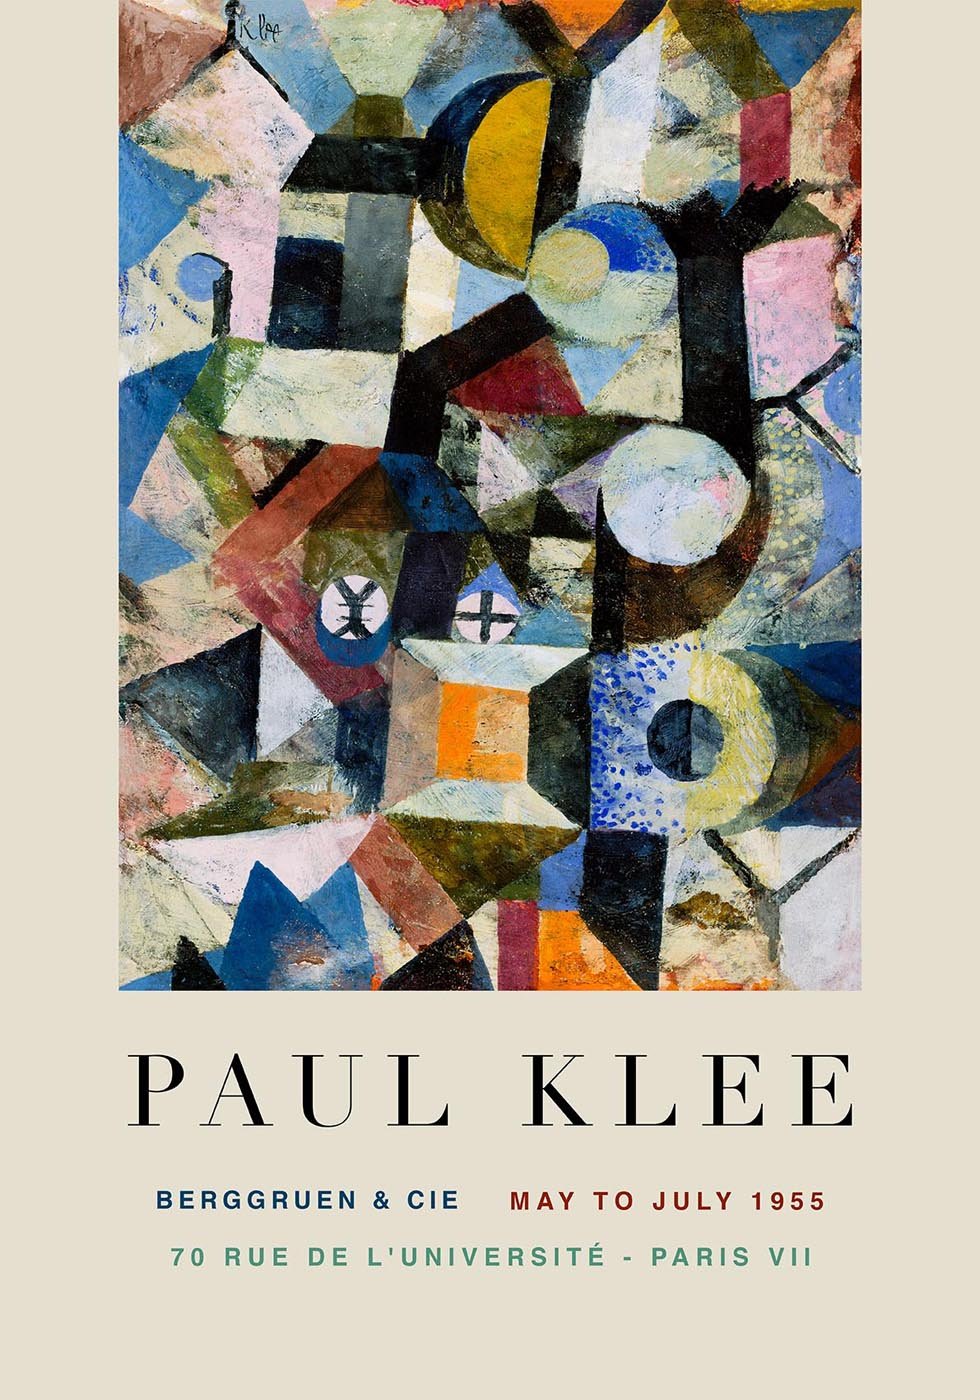 Paul Klee Yellow Half-Moon and the Y Art Exhibition Poster